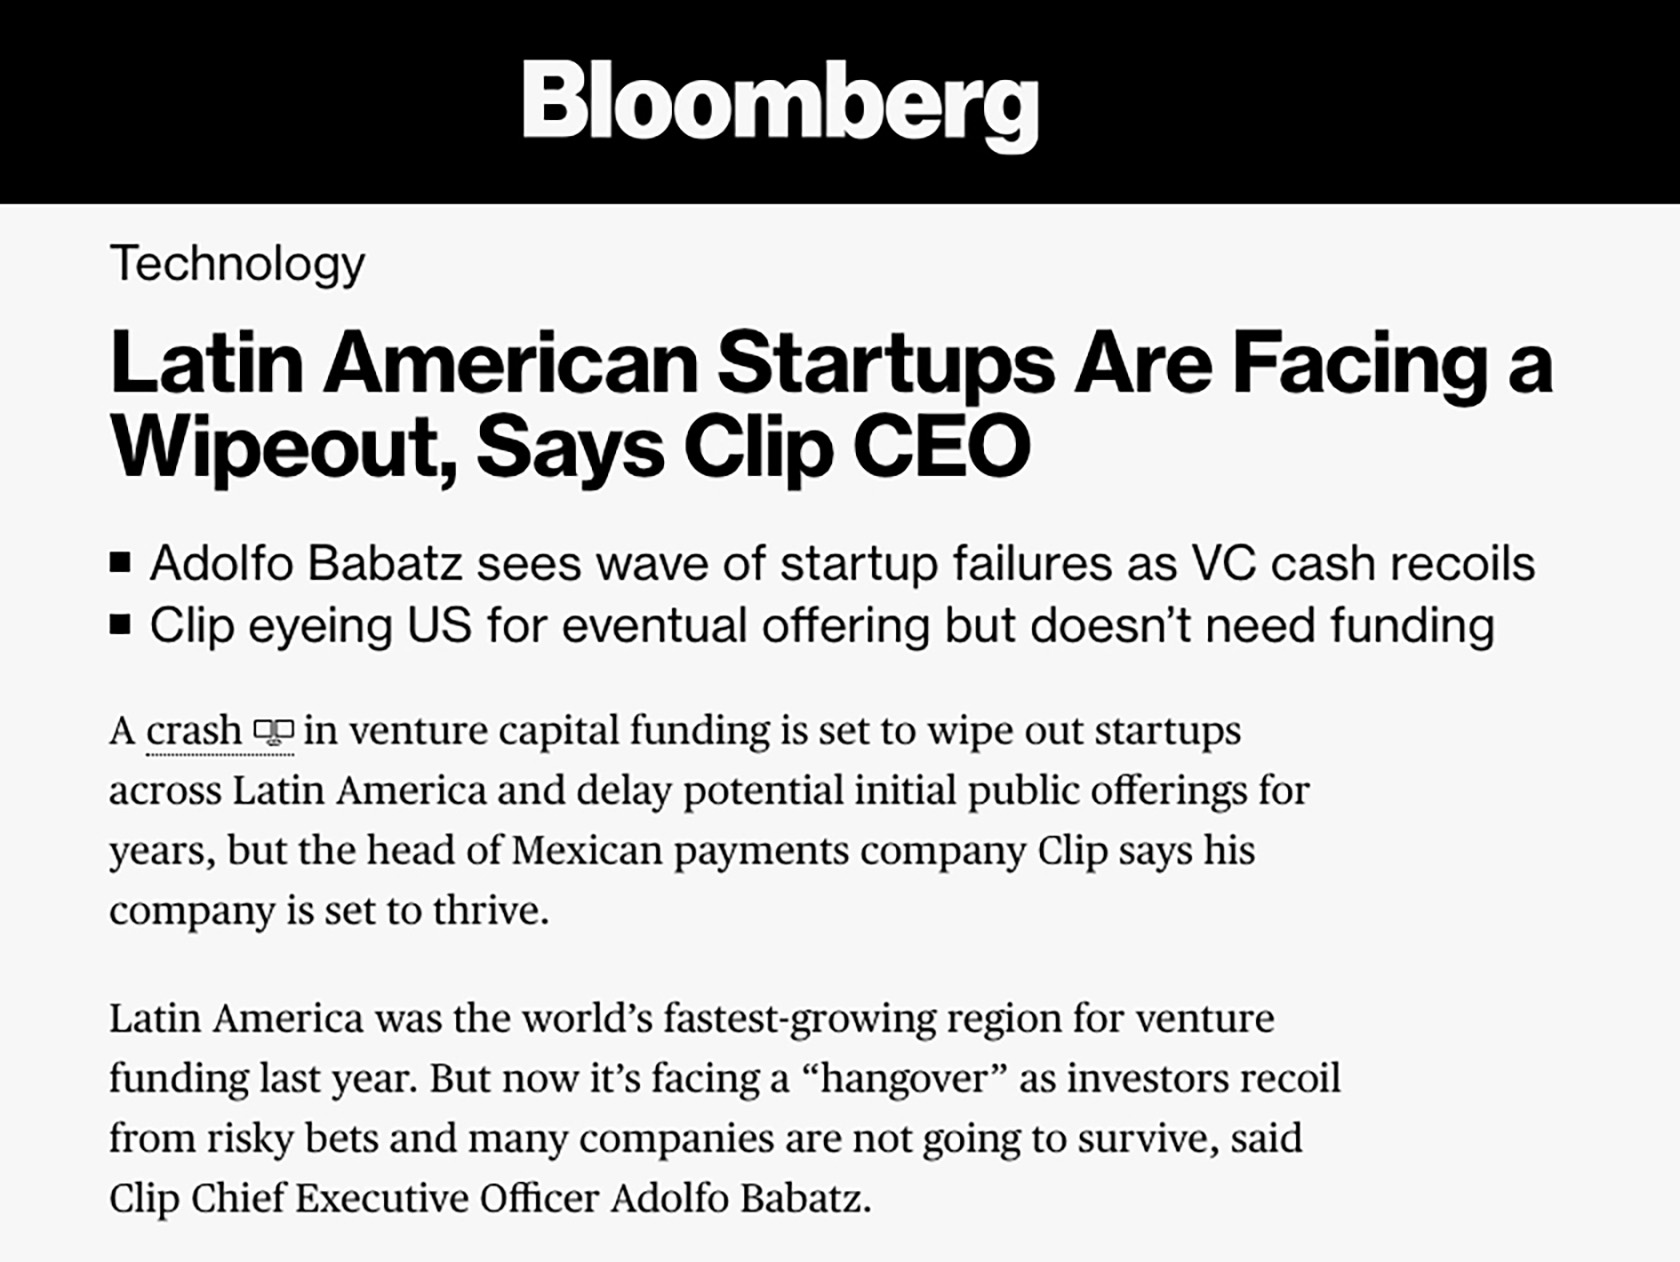 Mention of Clip in a Bloomberg article